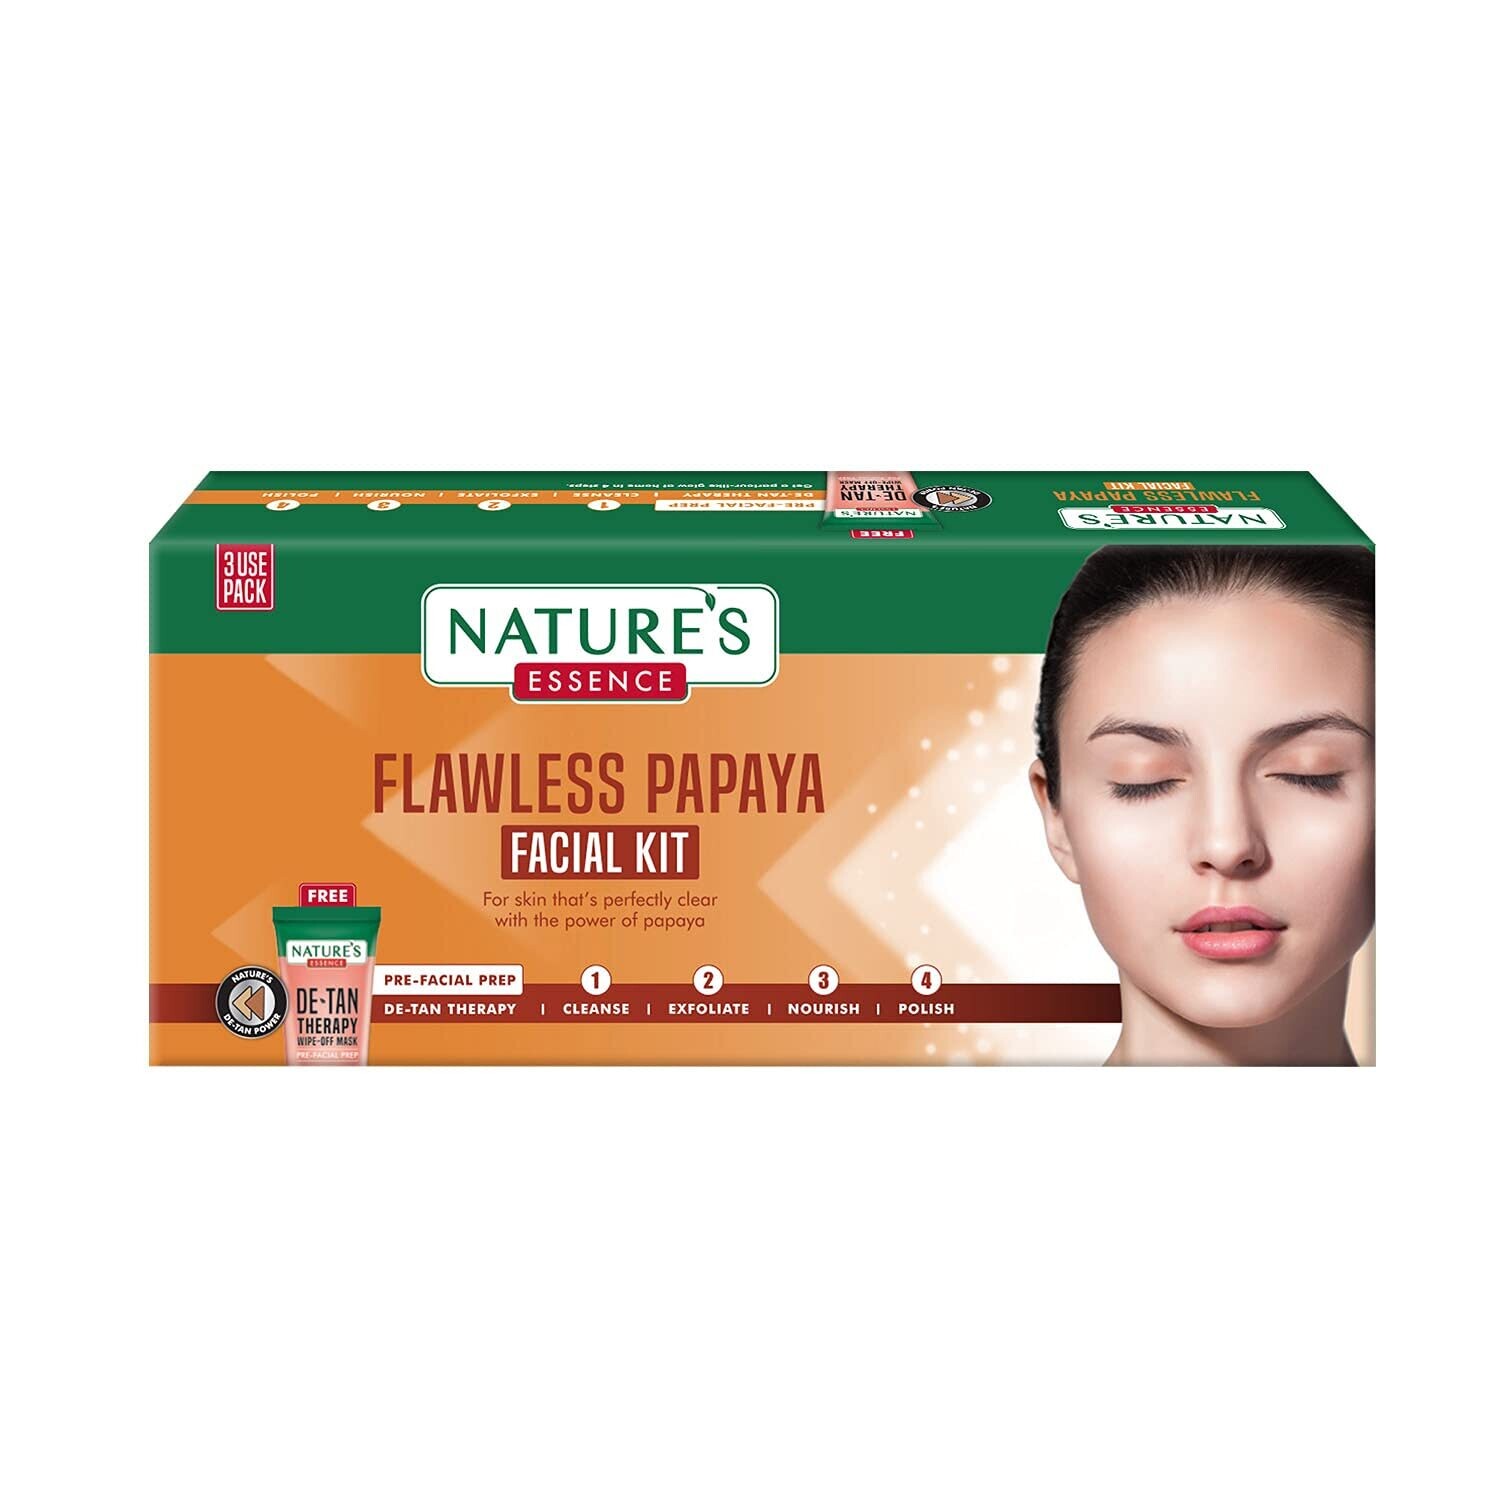 Nature's Essence Flawless Papaya Facial Kit 3 Use, White, 1 count, 60 gm